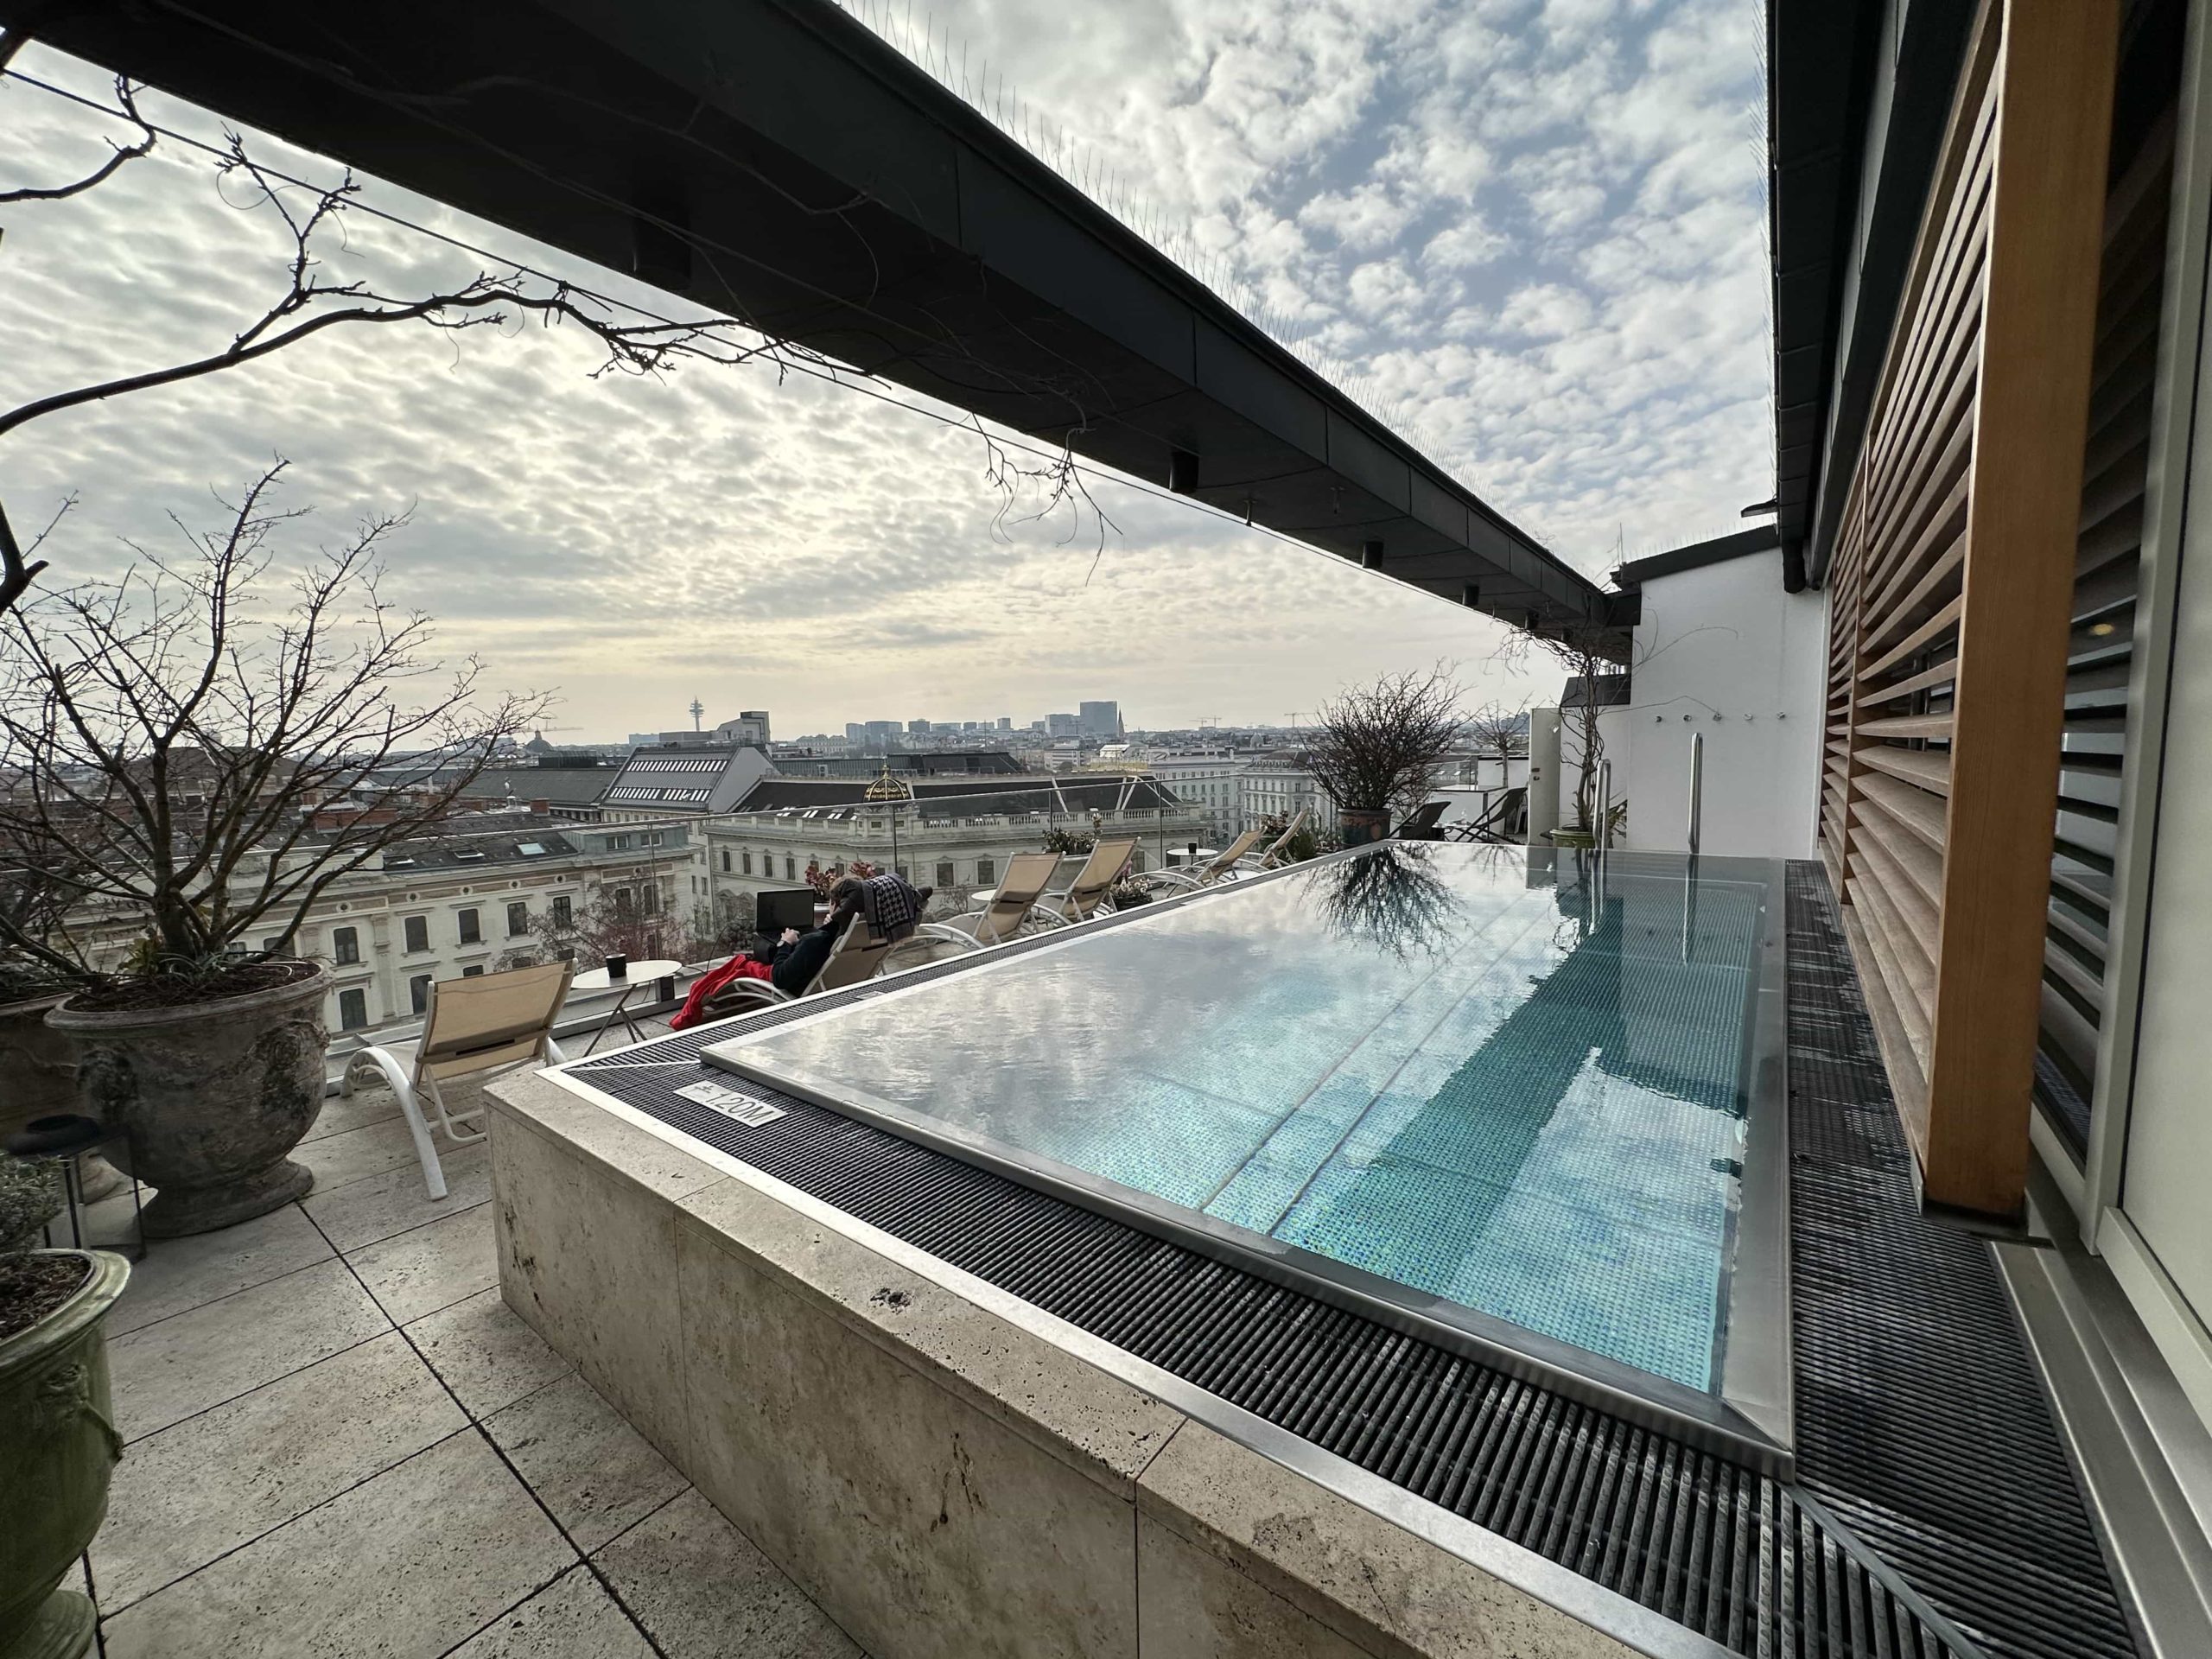 A rooftop terrace, with a small pool, overlooking views of the city of Vienna